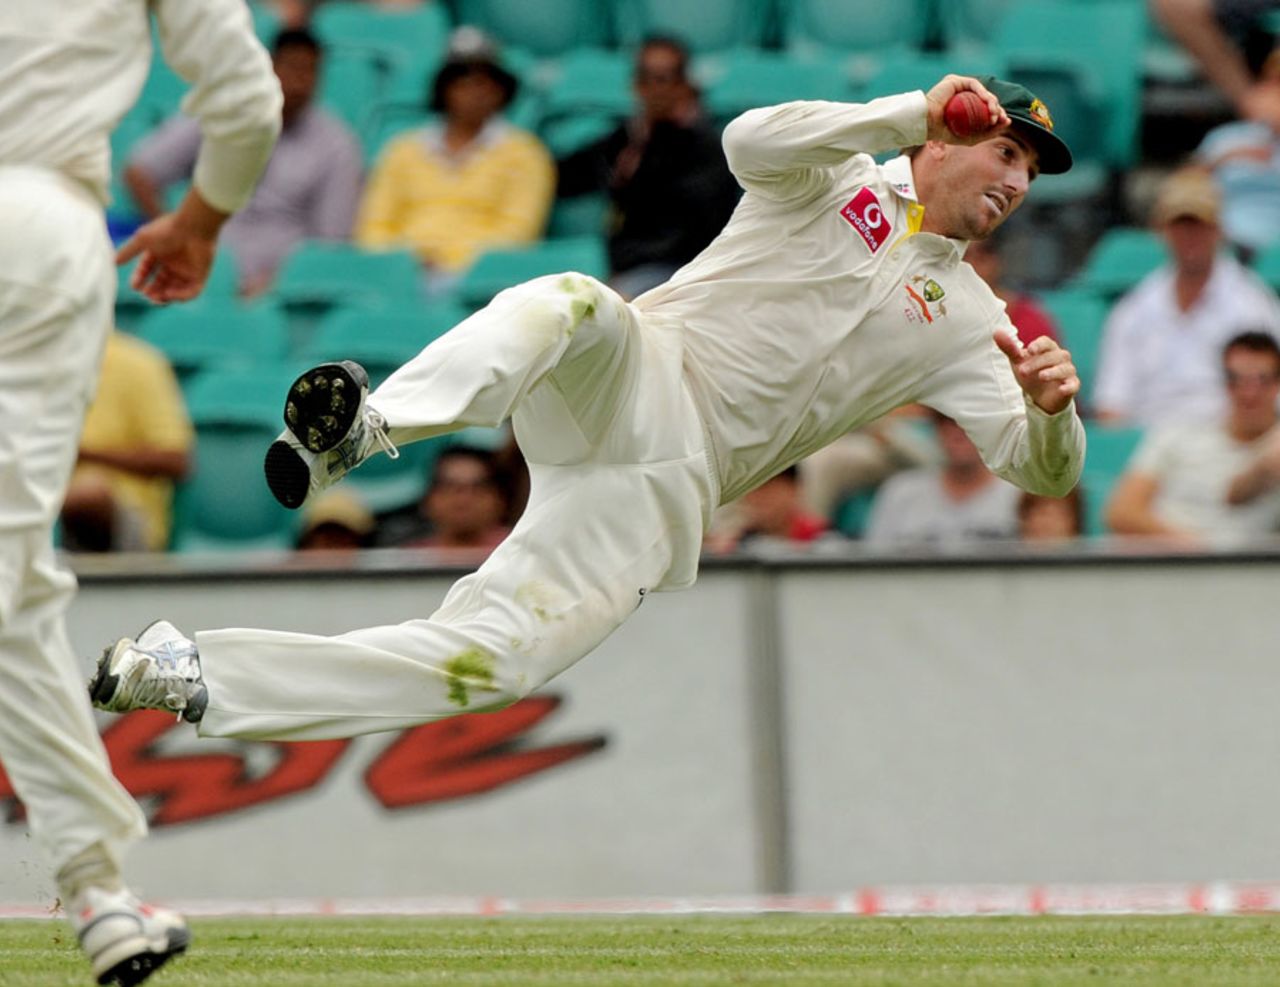 Shaun Marsh completes a catch to send Zaheer Khan on his way, Australia v India, 2nd Test, Sydney, 4th day, January 6, 2012